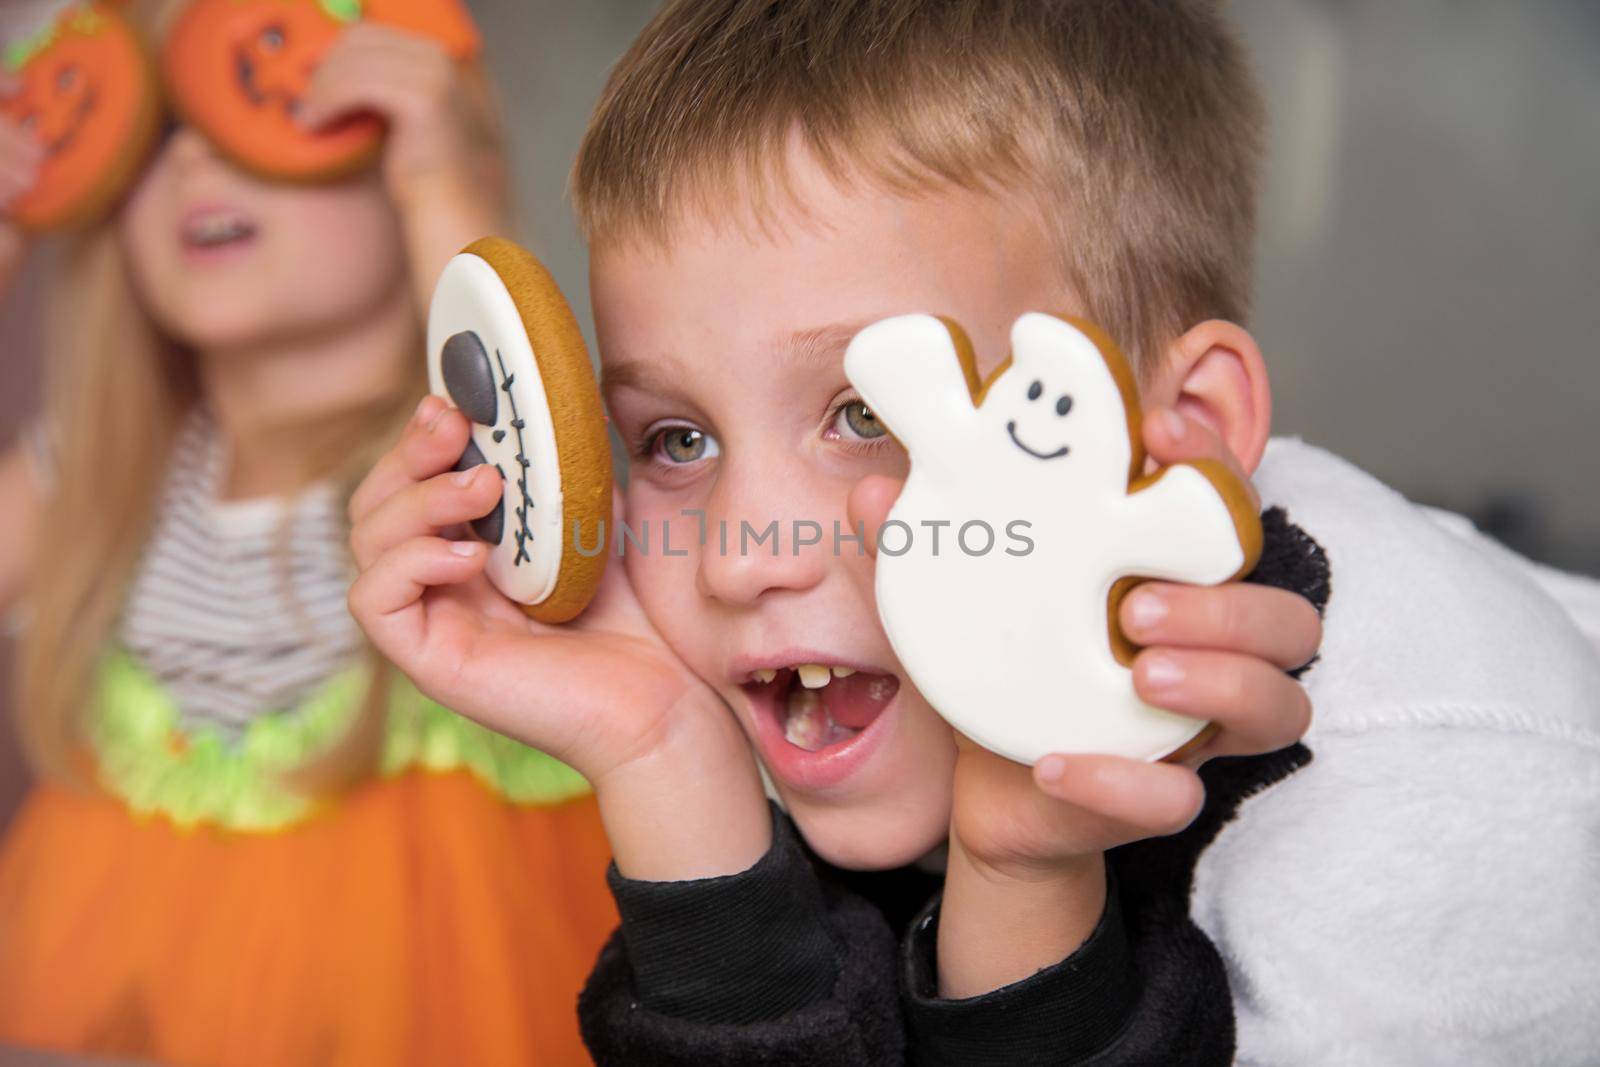 Close-up portrait of children with homemade unusual gingerbread cookies in their hands at the Halloween party. A boy in a skeleton costume, a girl in a pumpkin costume, holding hand-drawn ghost pastry